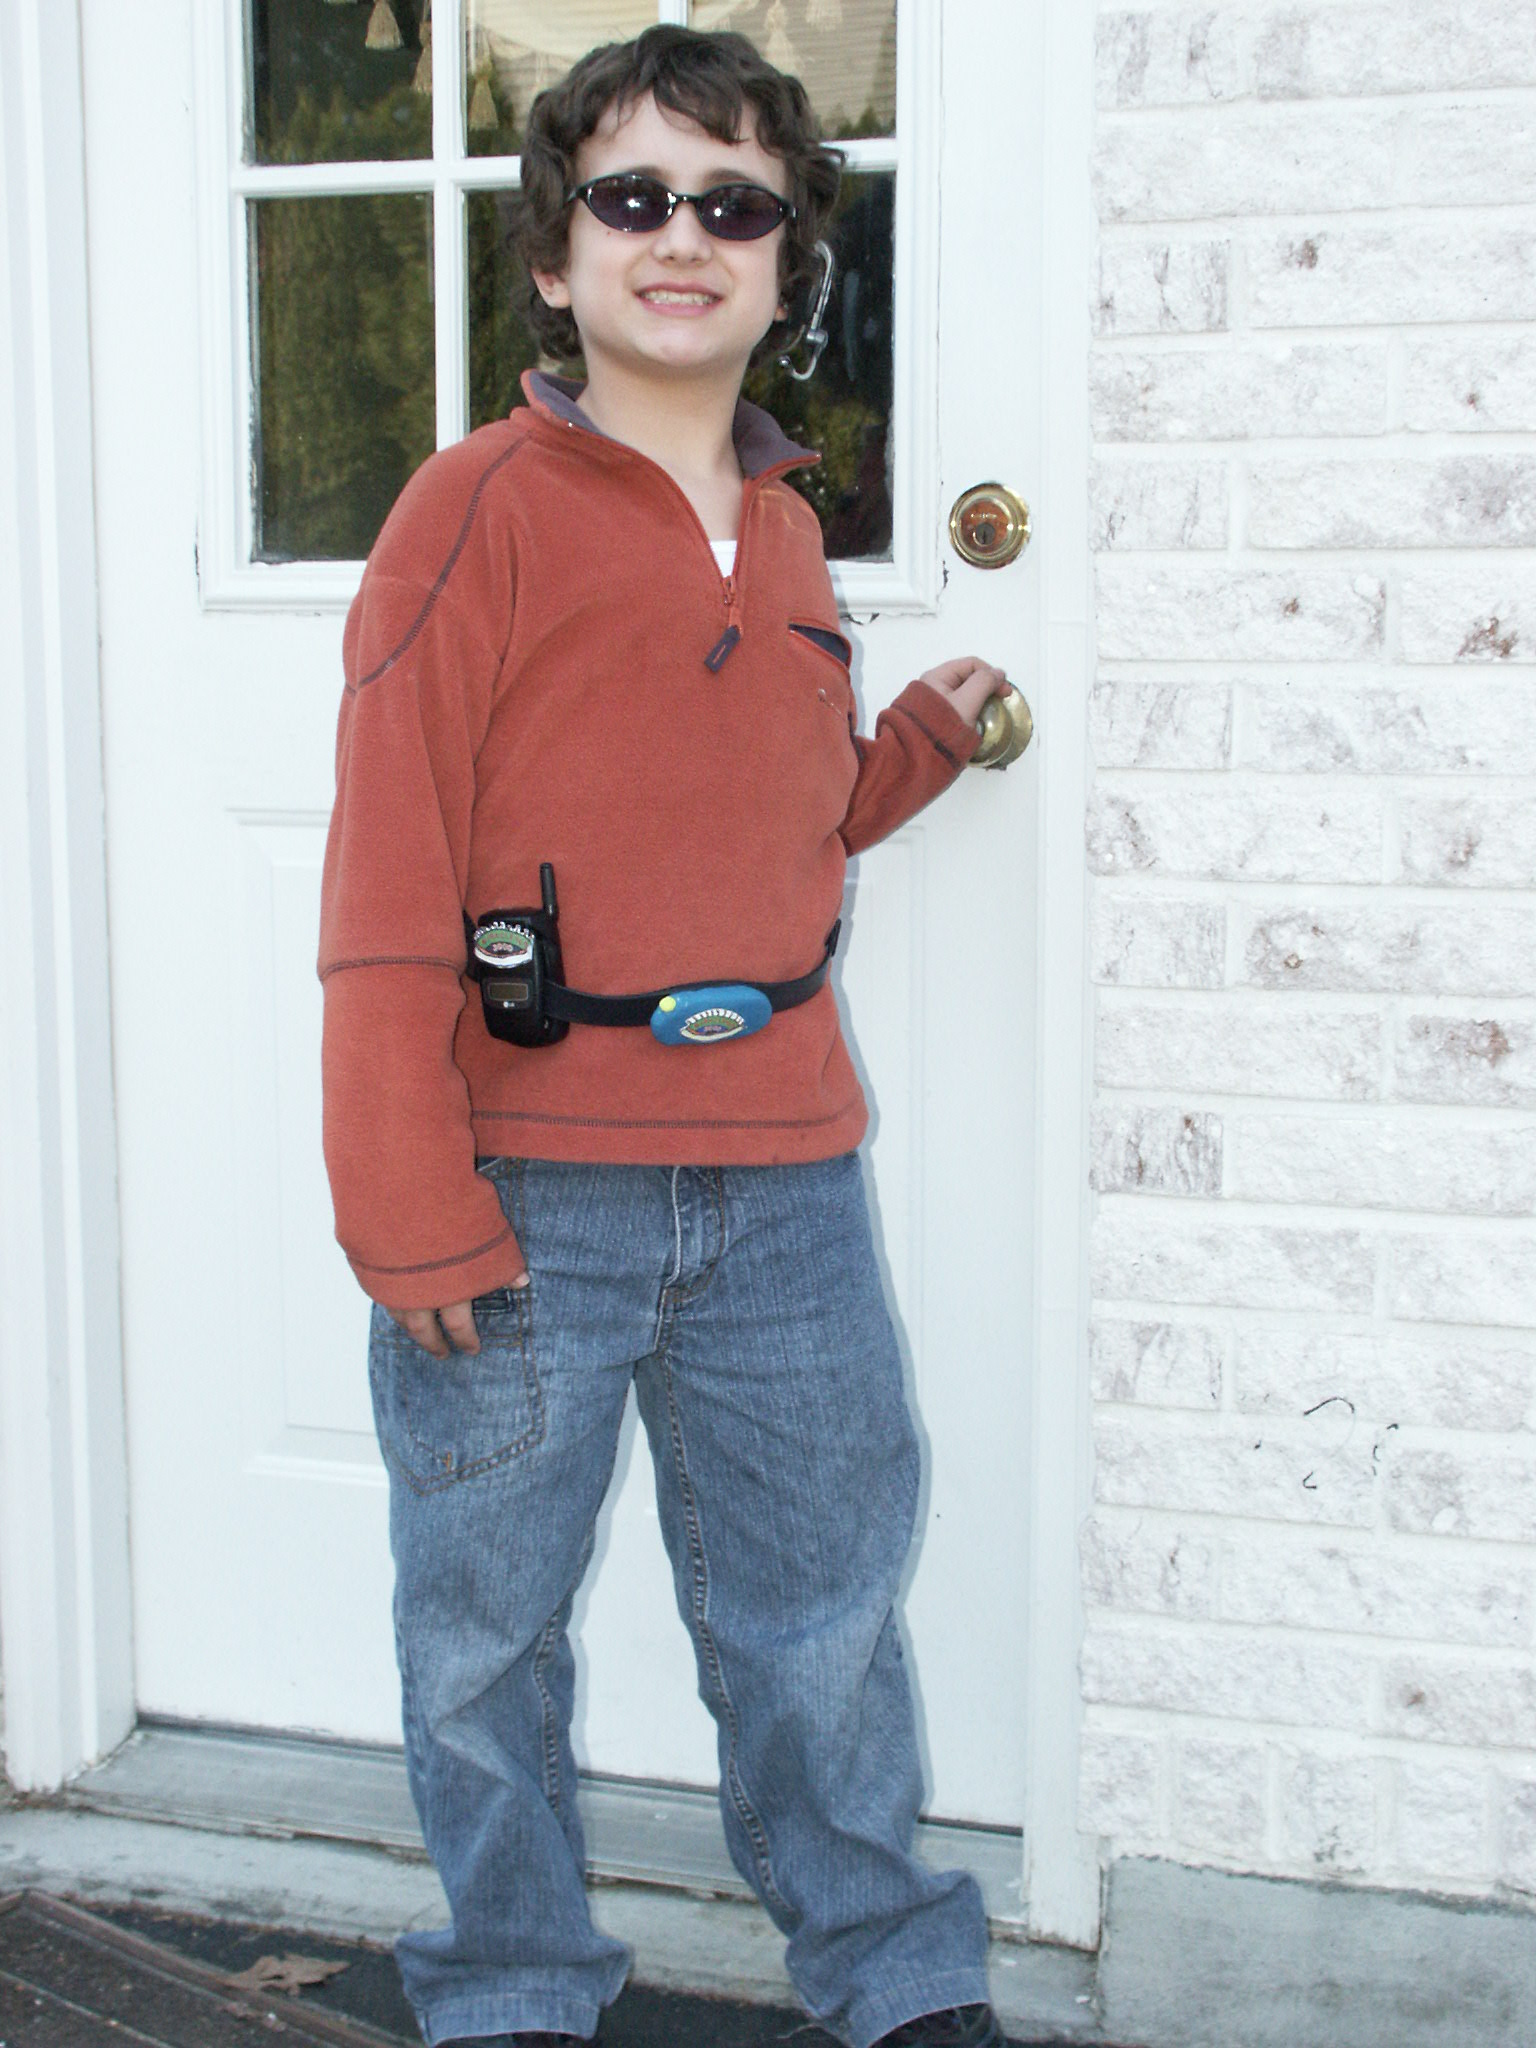 Photo of boy with MiraclEyes' equipment on walking out of his house.